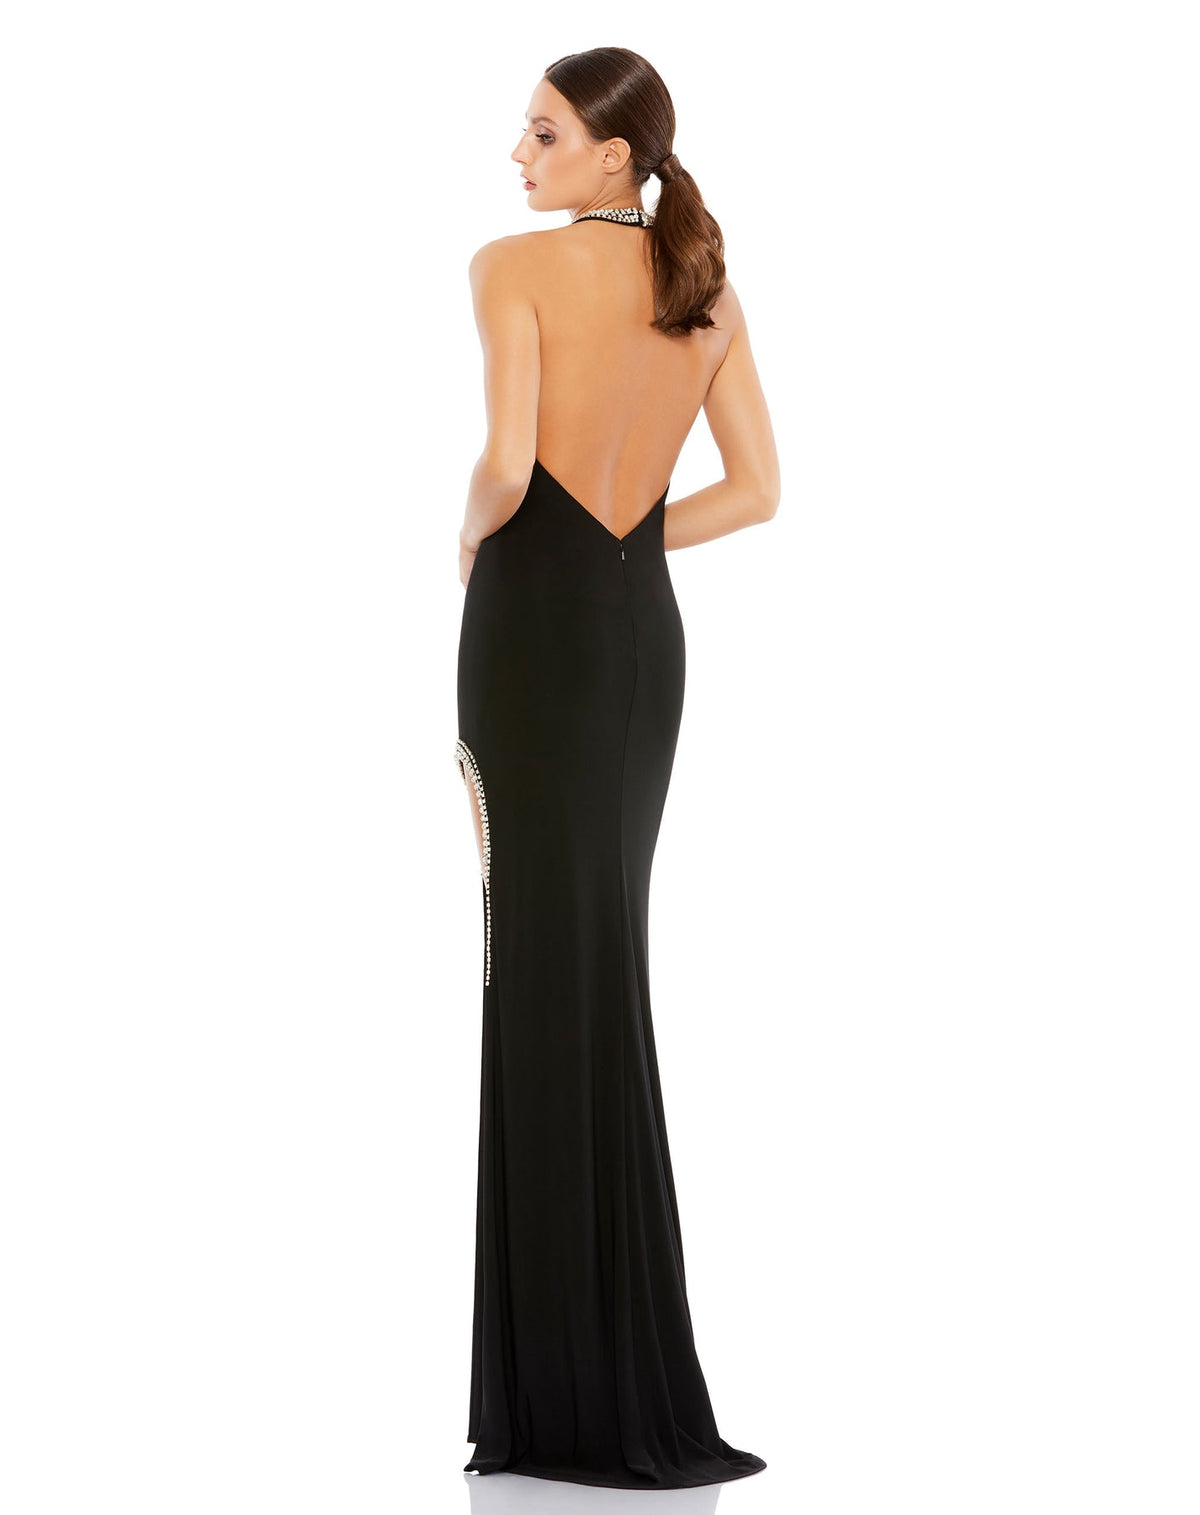 Backless Halterneck gown with rhinestone accents - Black by Mac Duggal back view